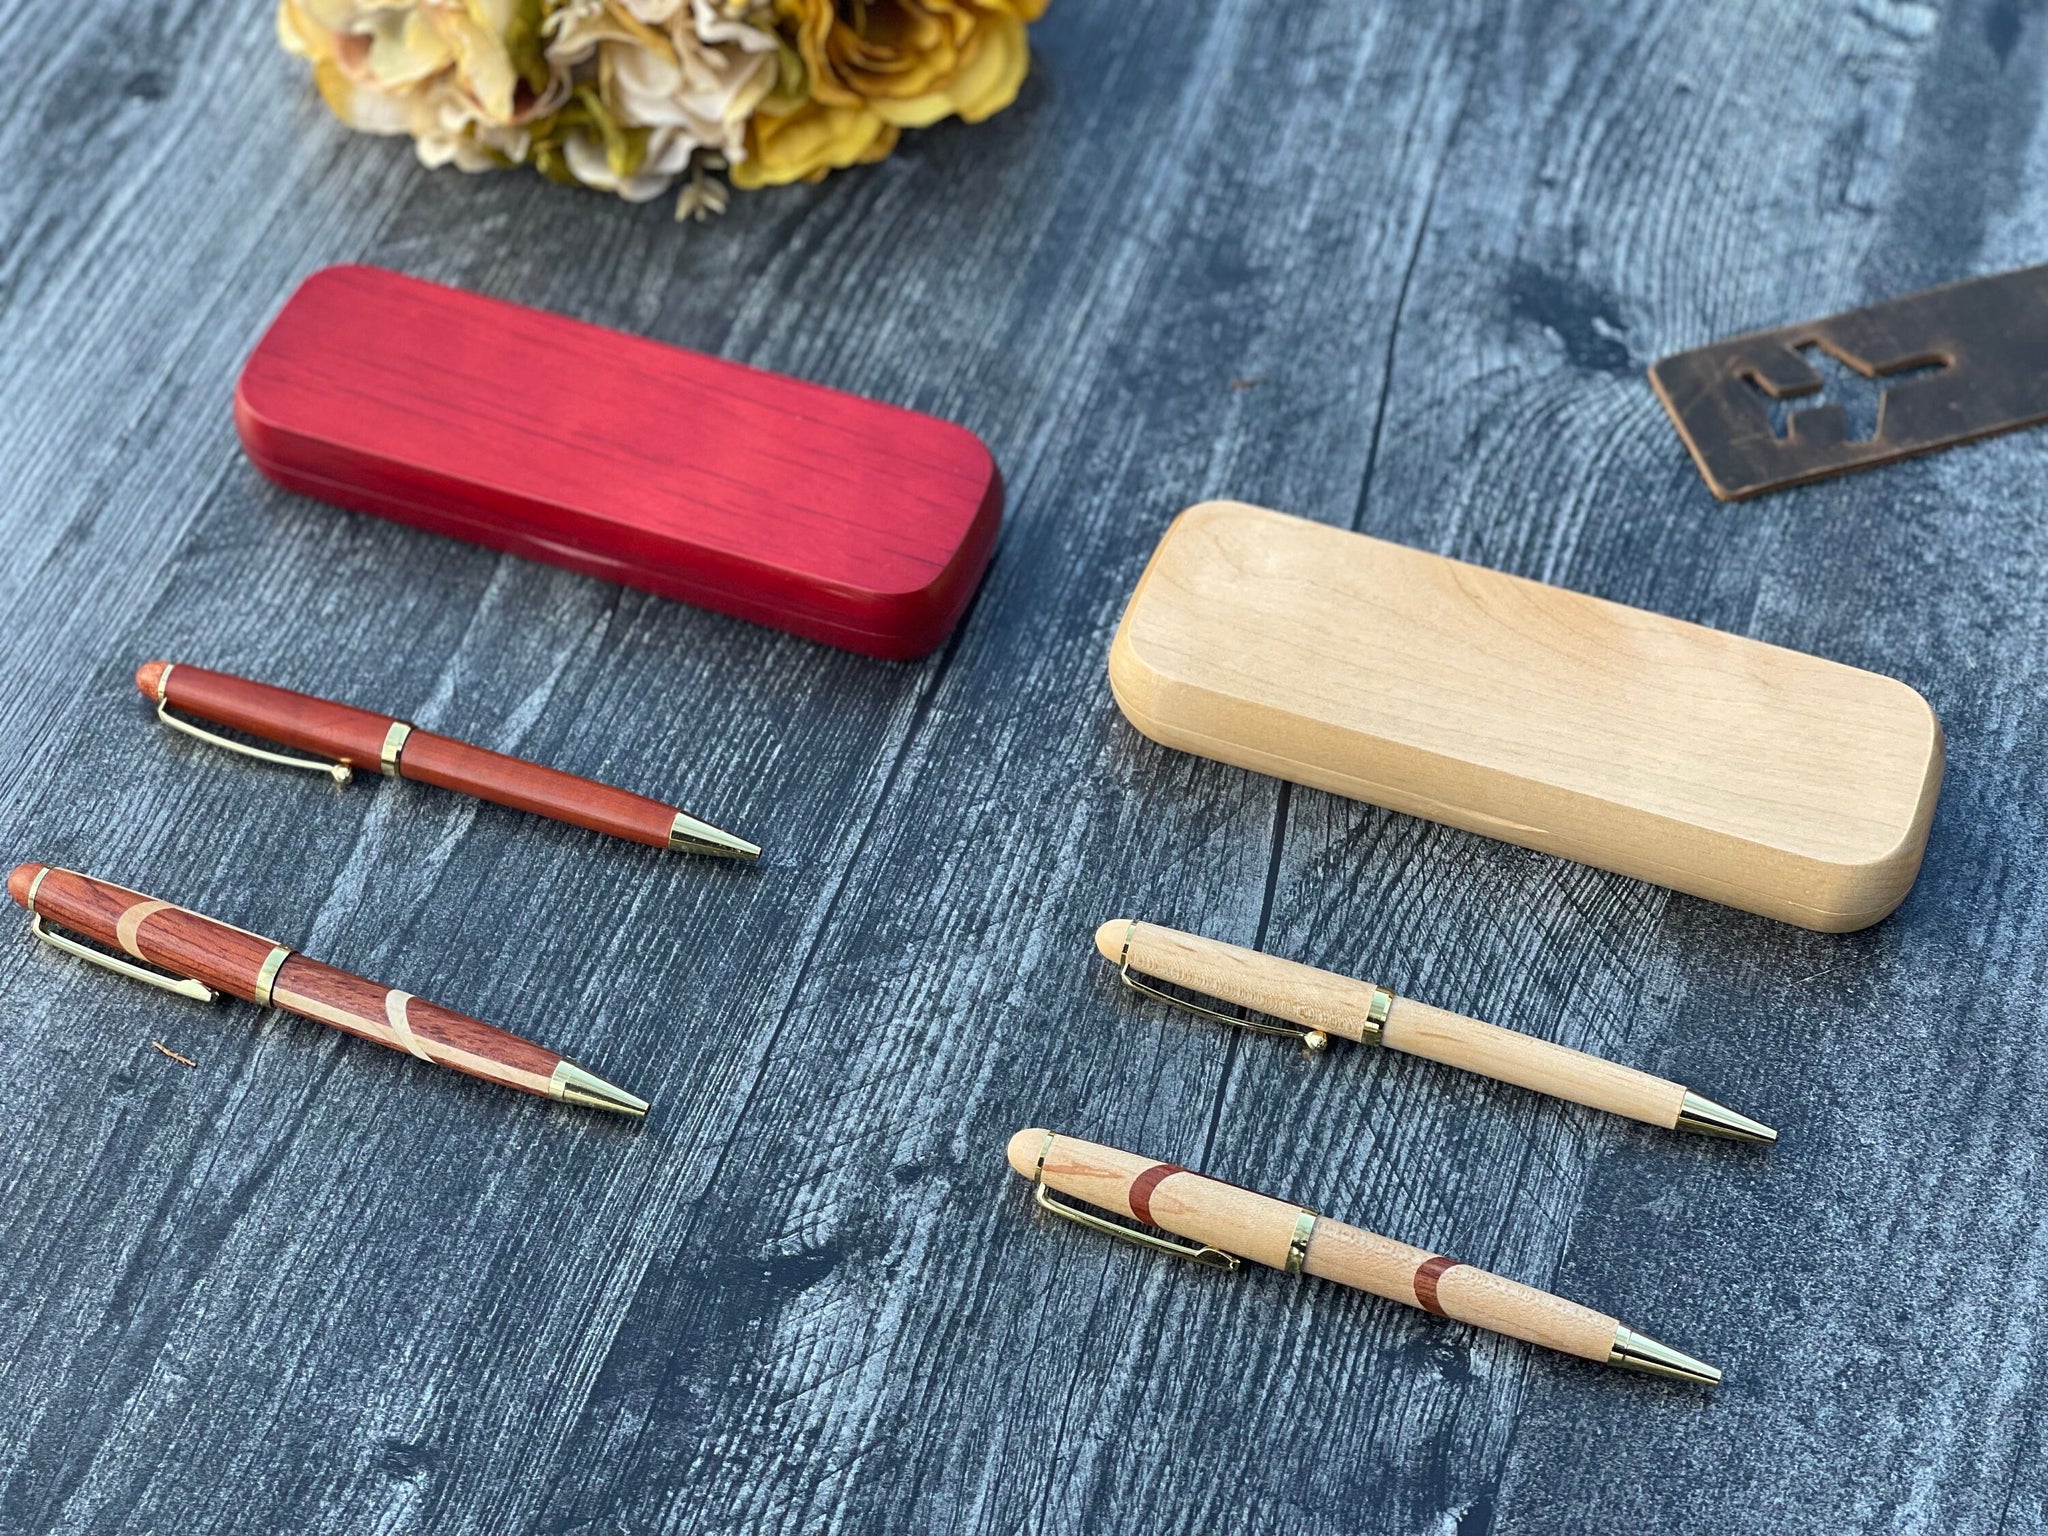 5th Year Anniversary Gift, Personalized Wooden Pen Case and Pen Set, Company gift, office gift, personalized pen case, personalized pen set